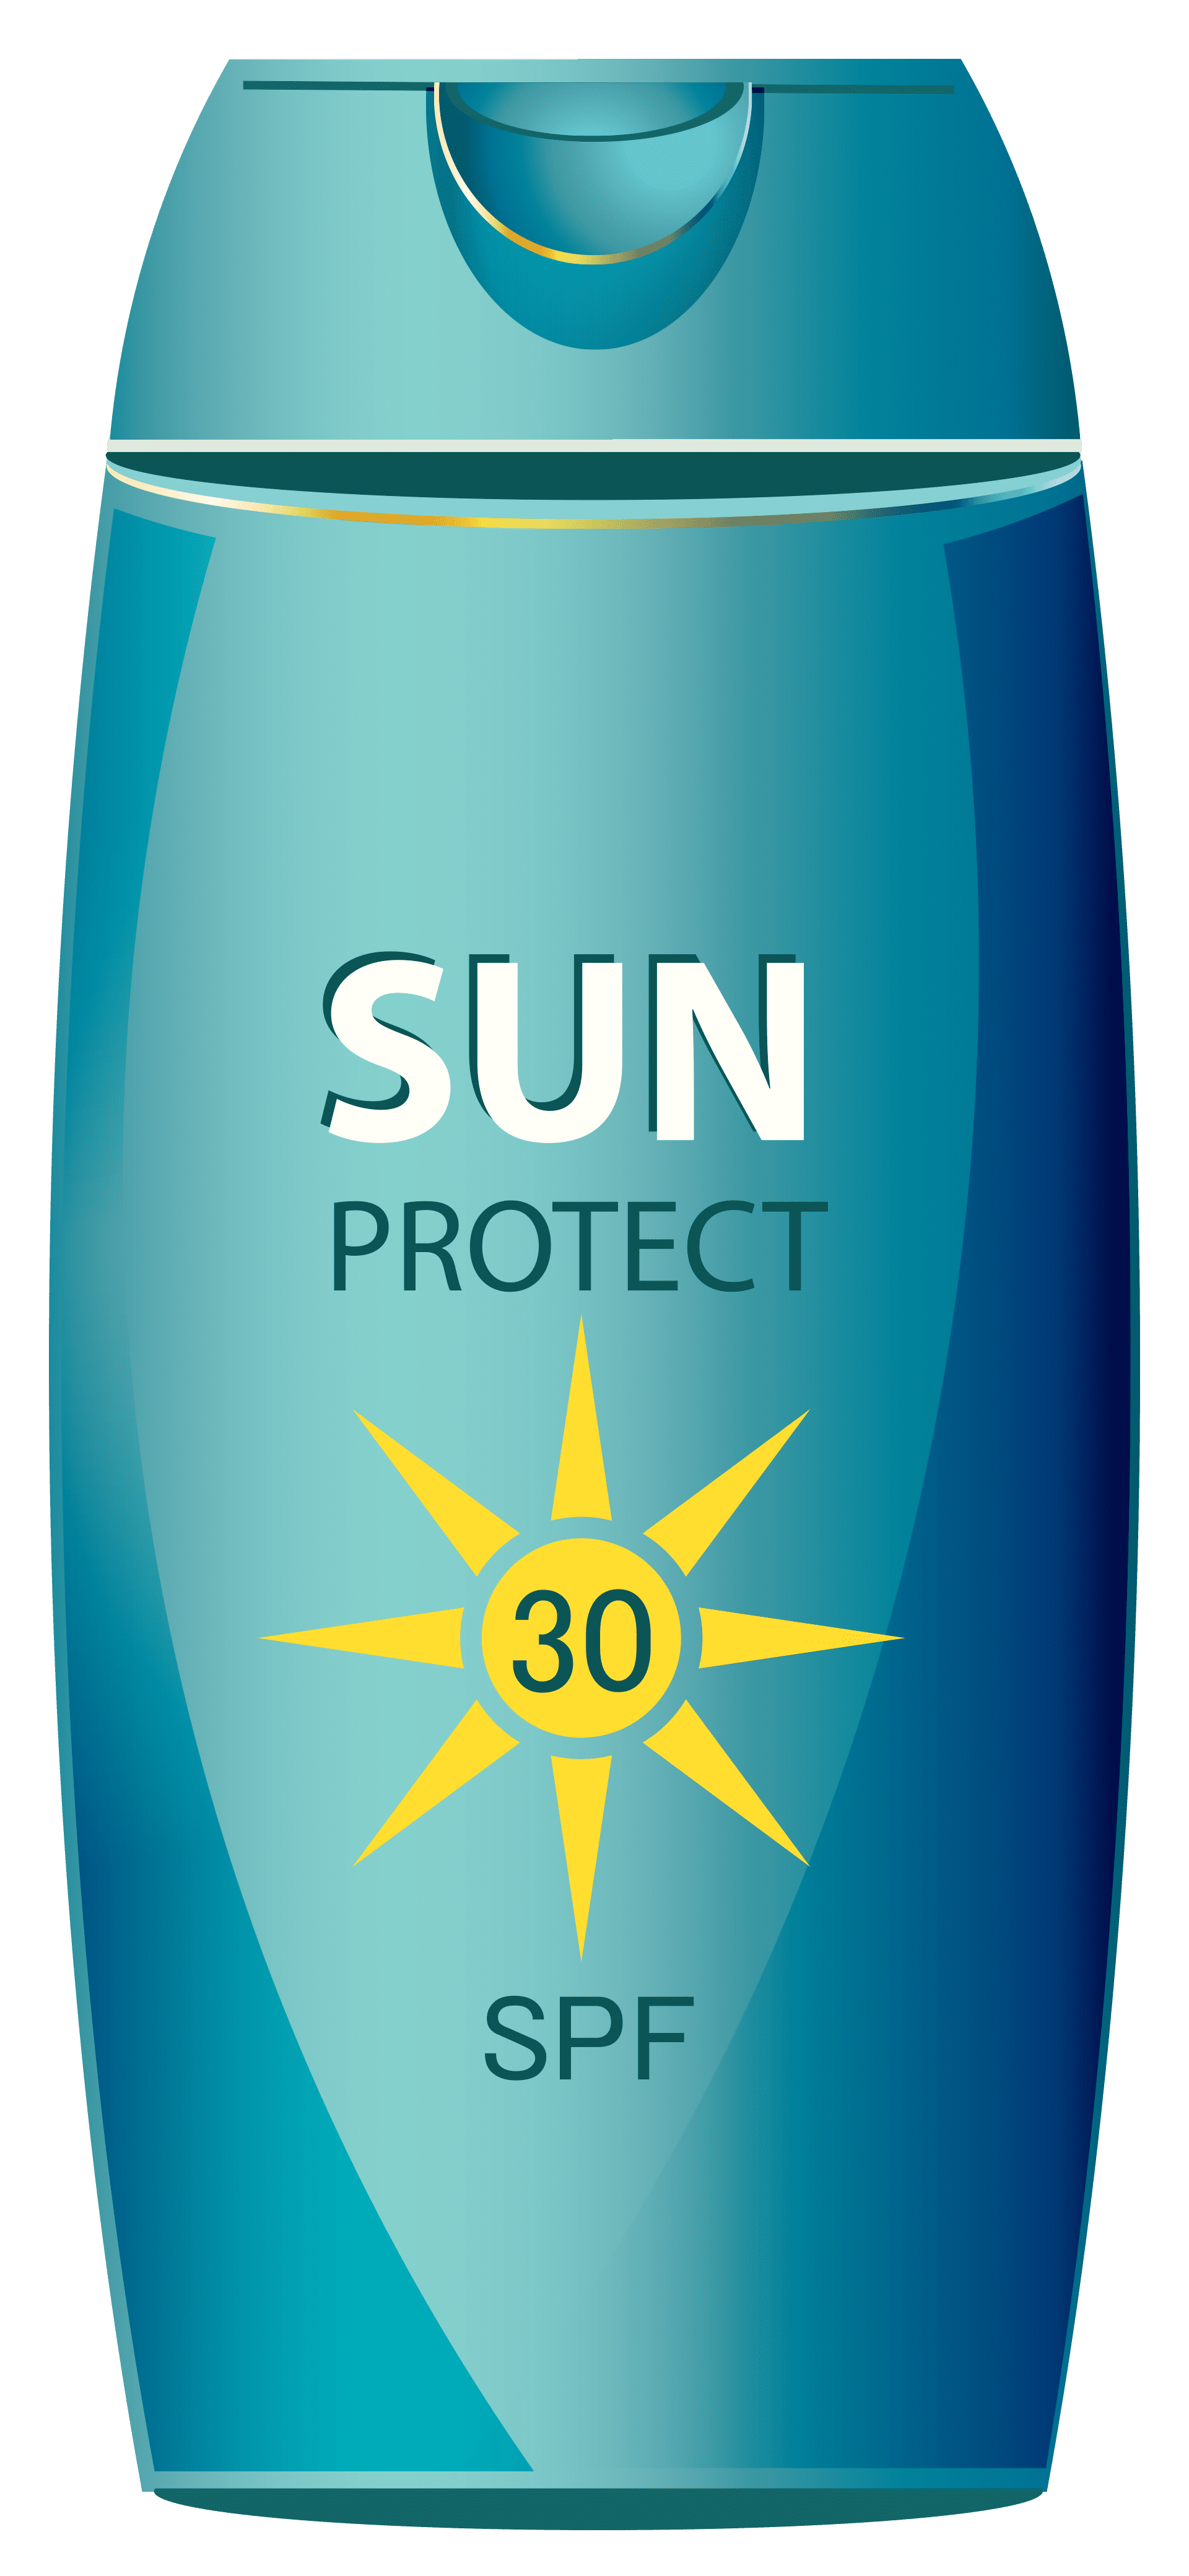 Sunscreen sun protect clipart picture